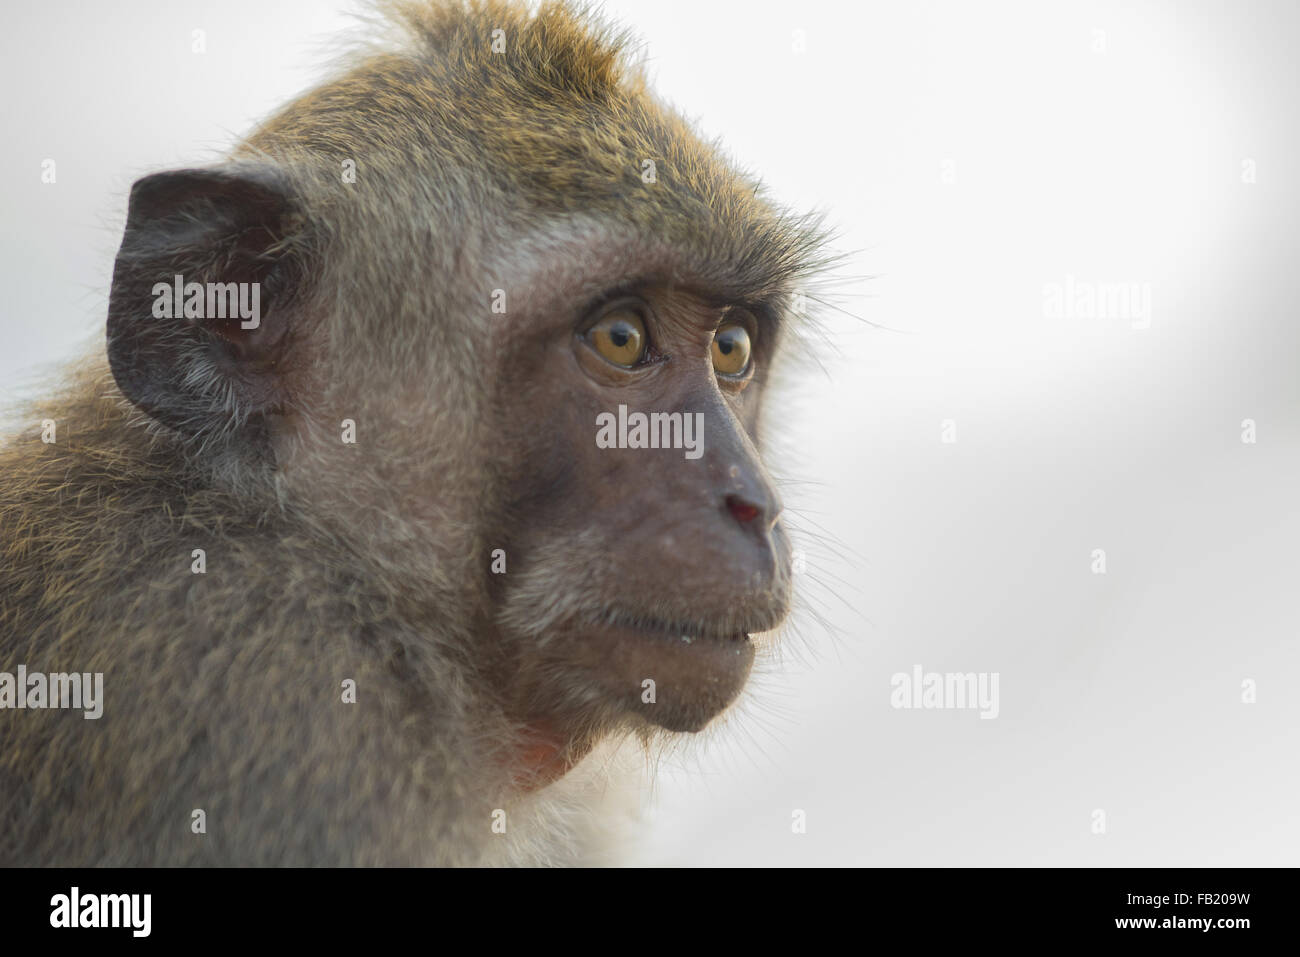 Wild monkey face close up portrait, wildlife photography ideal for ecotourism conservation campaign. Stock Photo